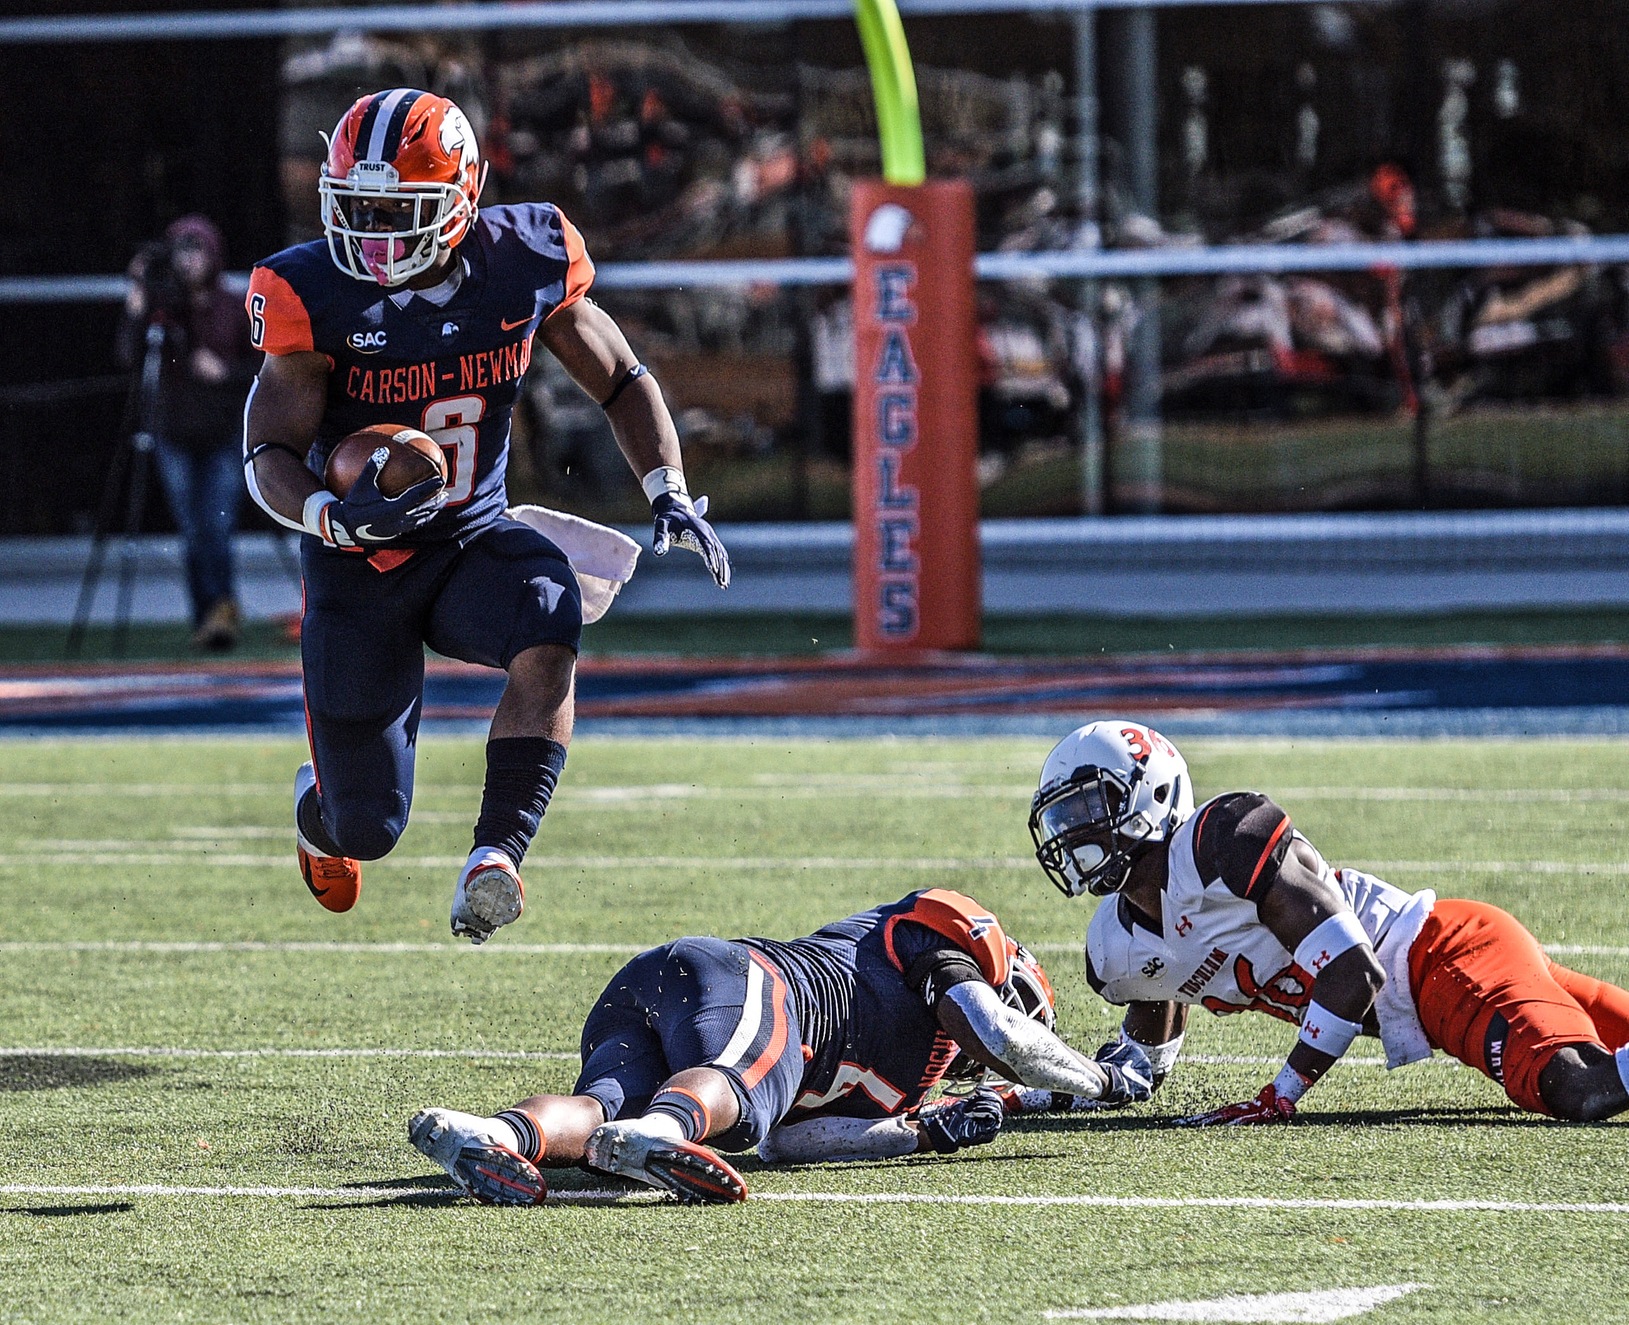 No. 24 Carson-Newman begins playoff journey with jaunt to No. 11 Bowie State